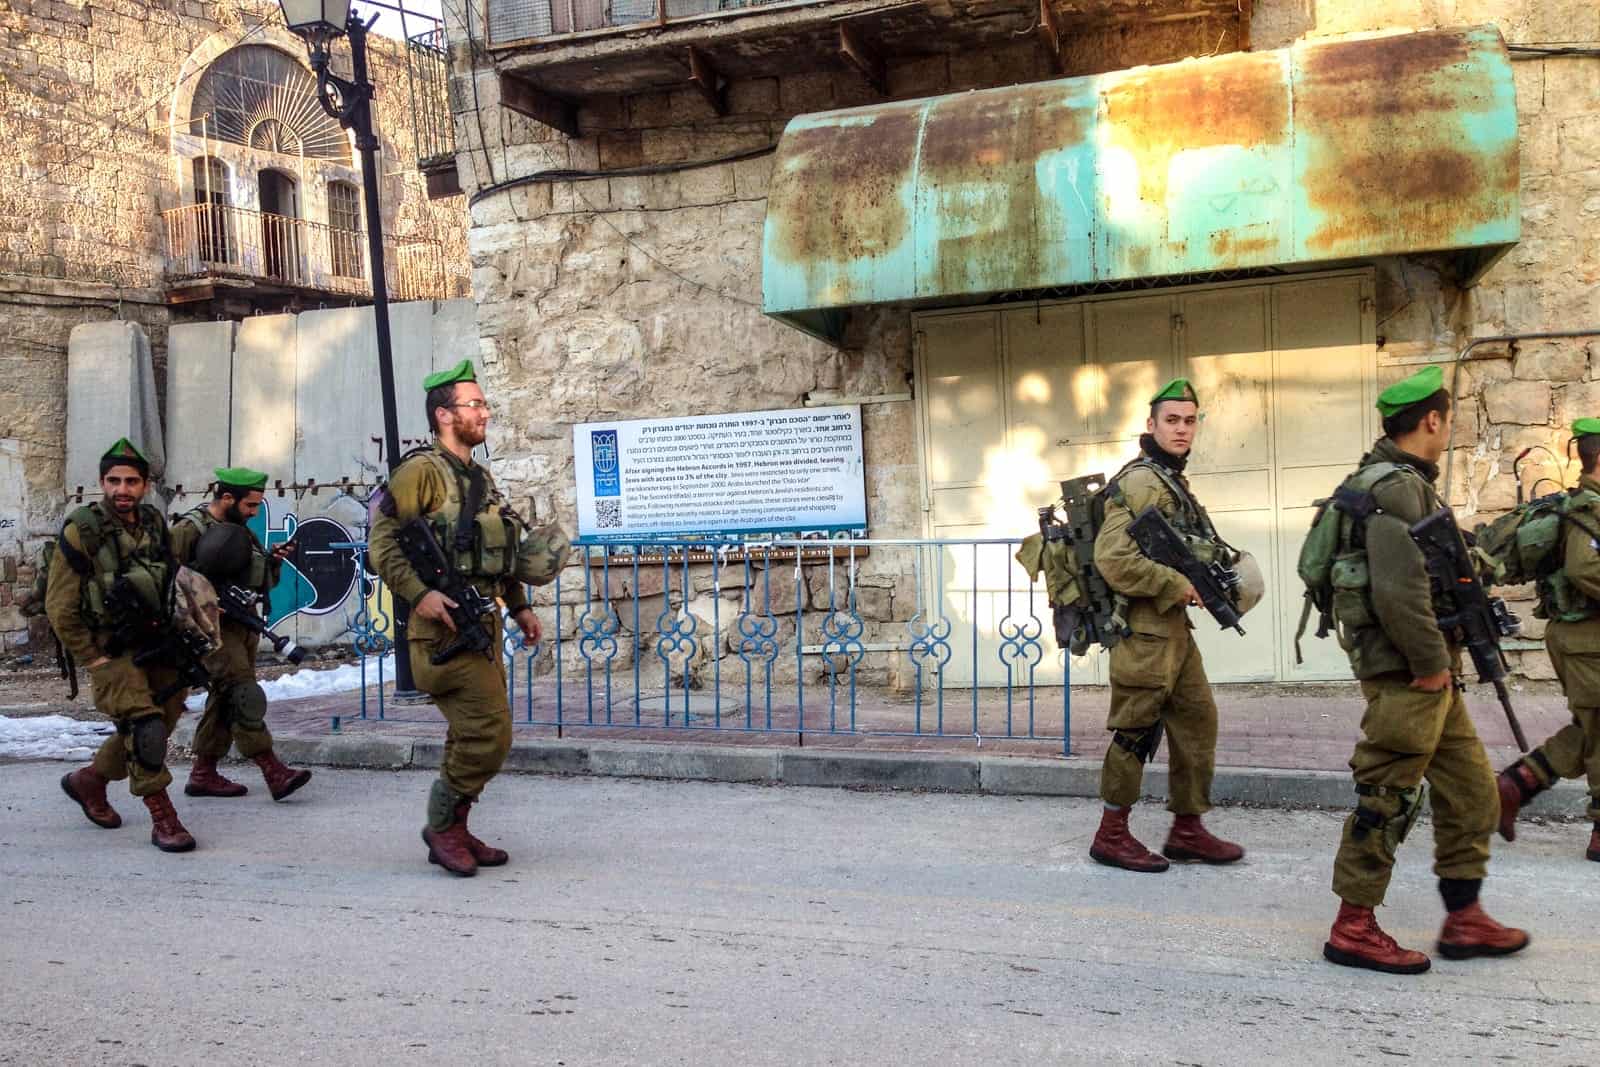 Israeli soldiers on the streets of Hebron in the West where tourists can visit